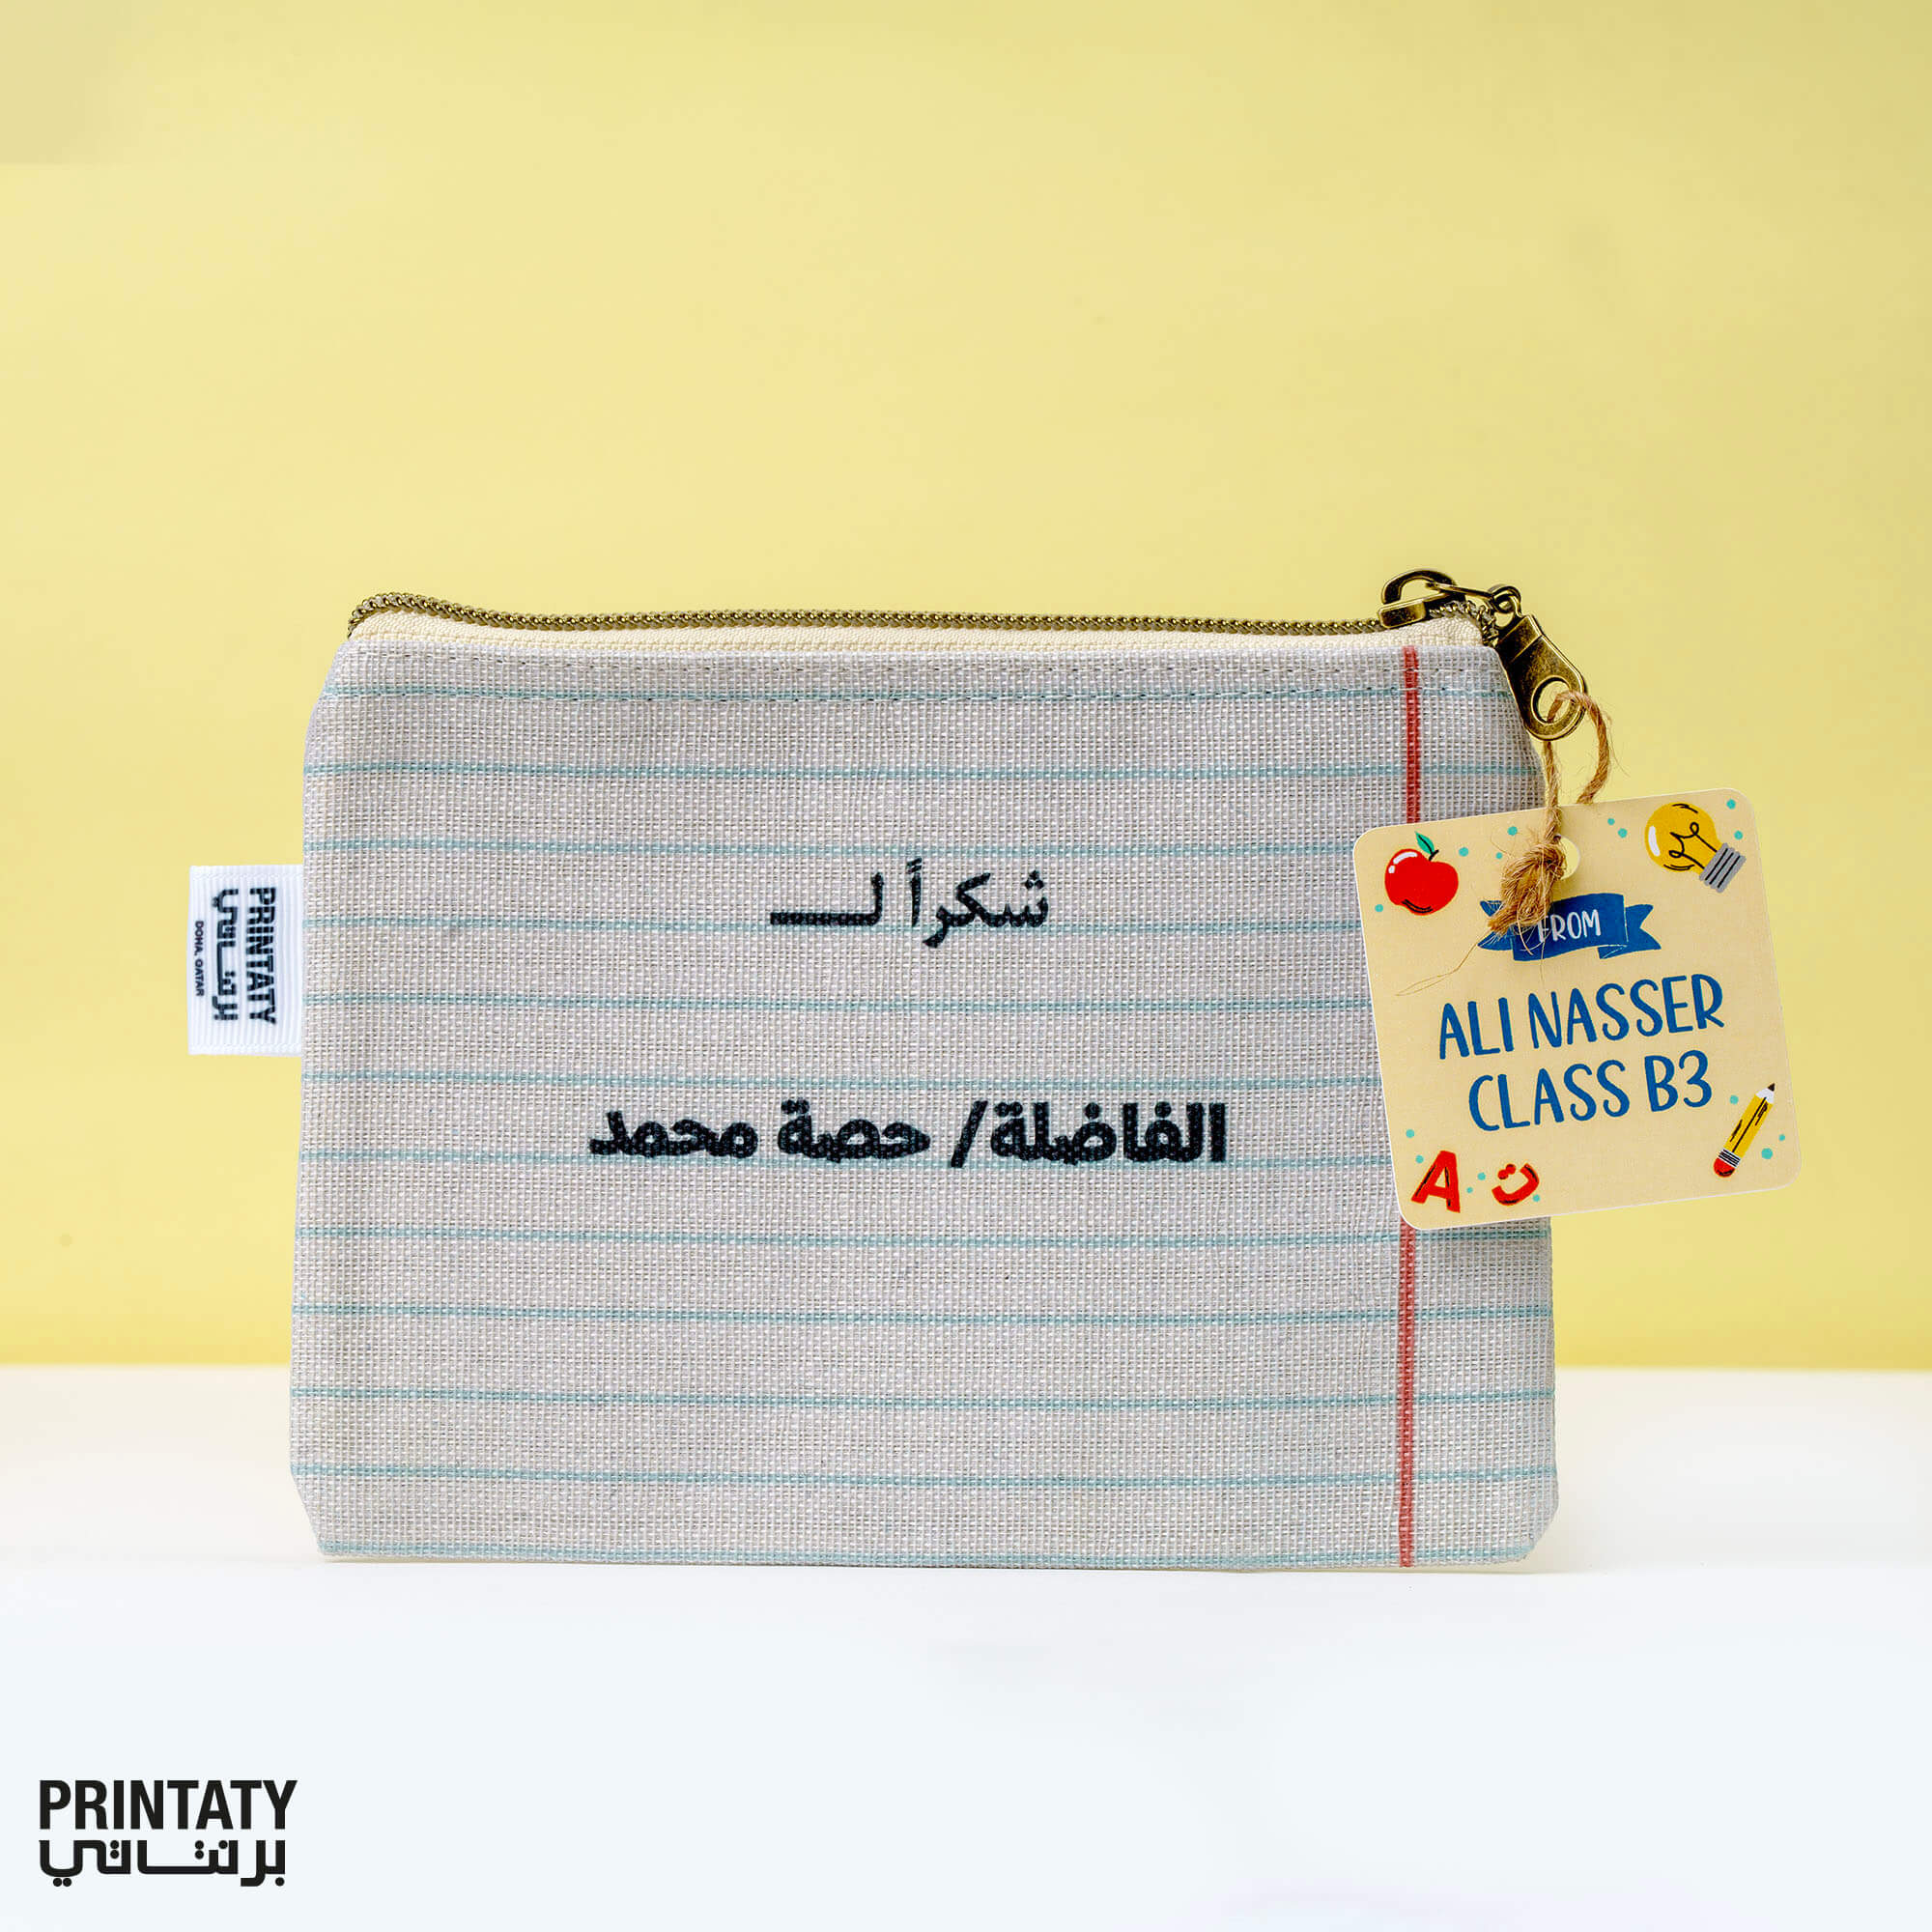 A Gift For The Teacher: A Pencil Case With The Teacher’s Name Printed On It And A Aift Card
